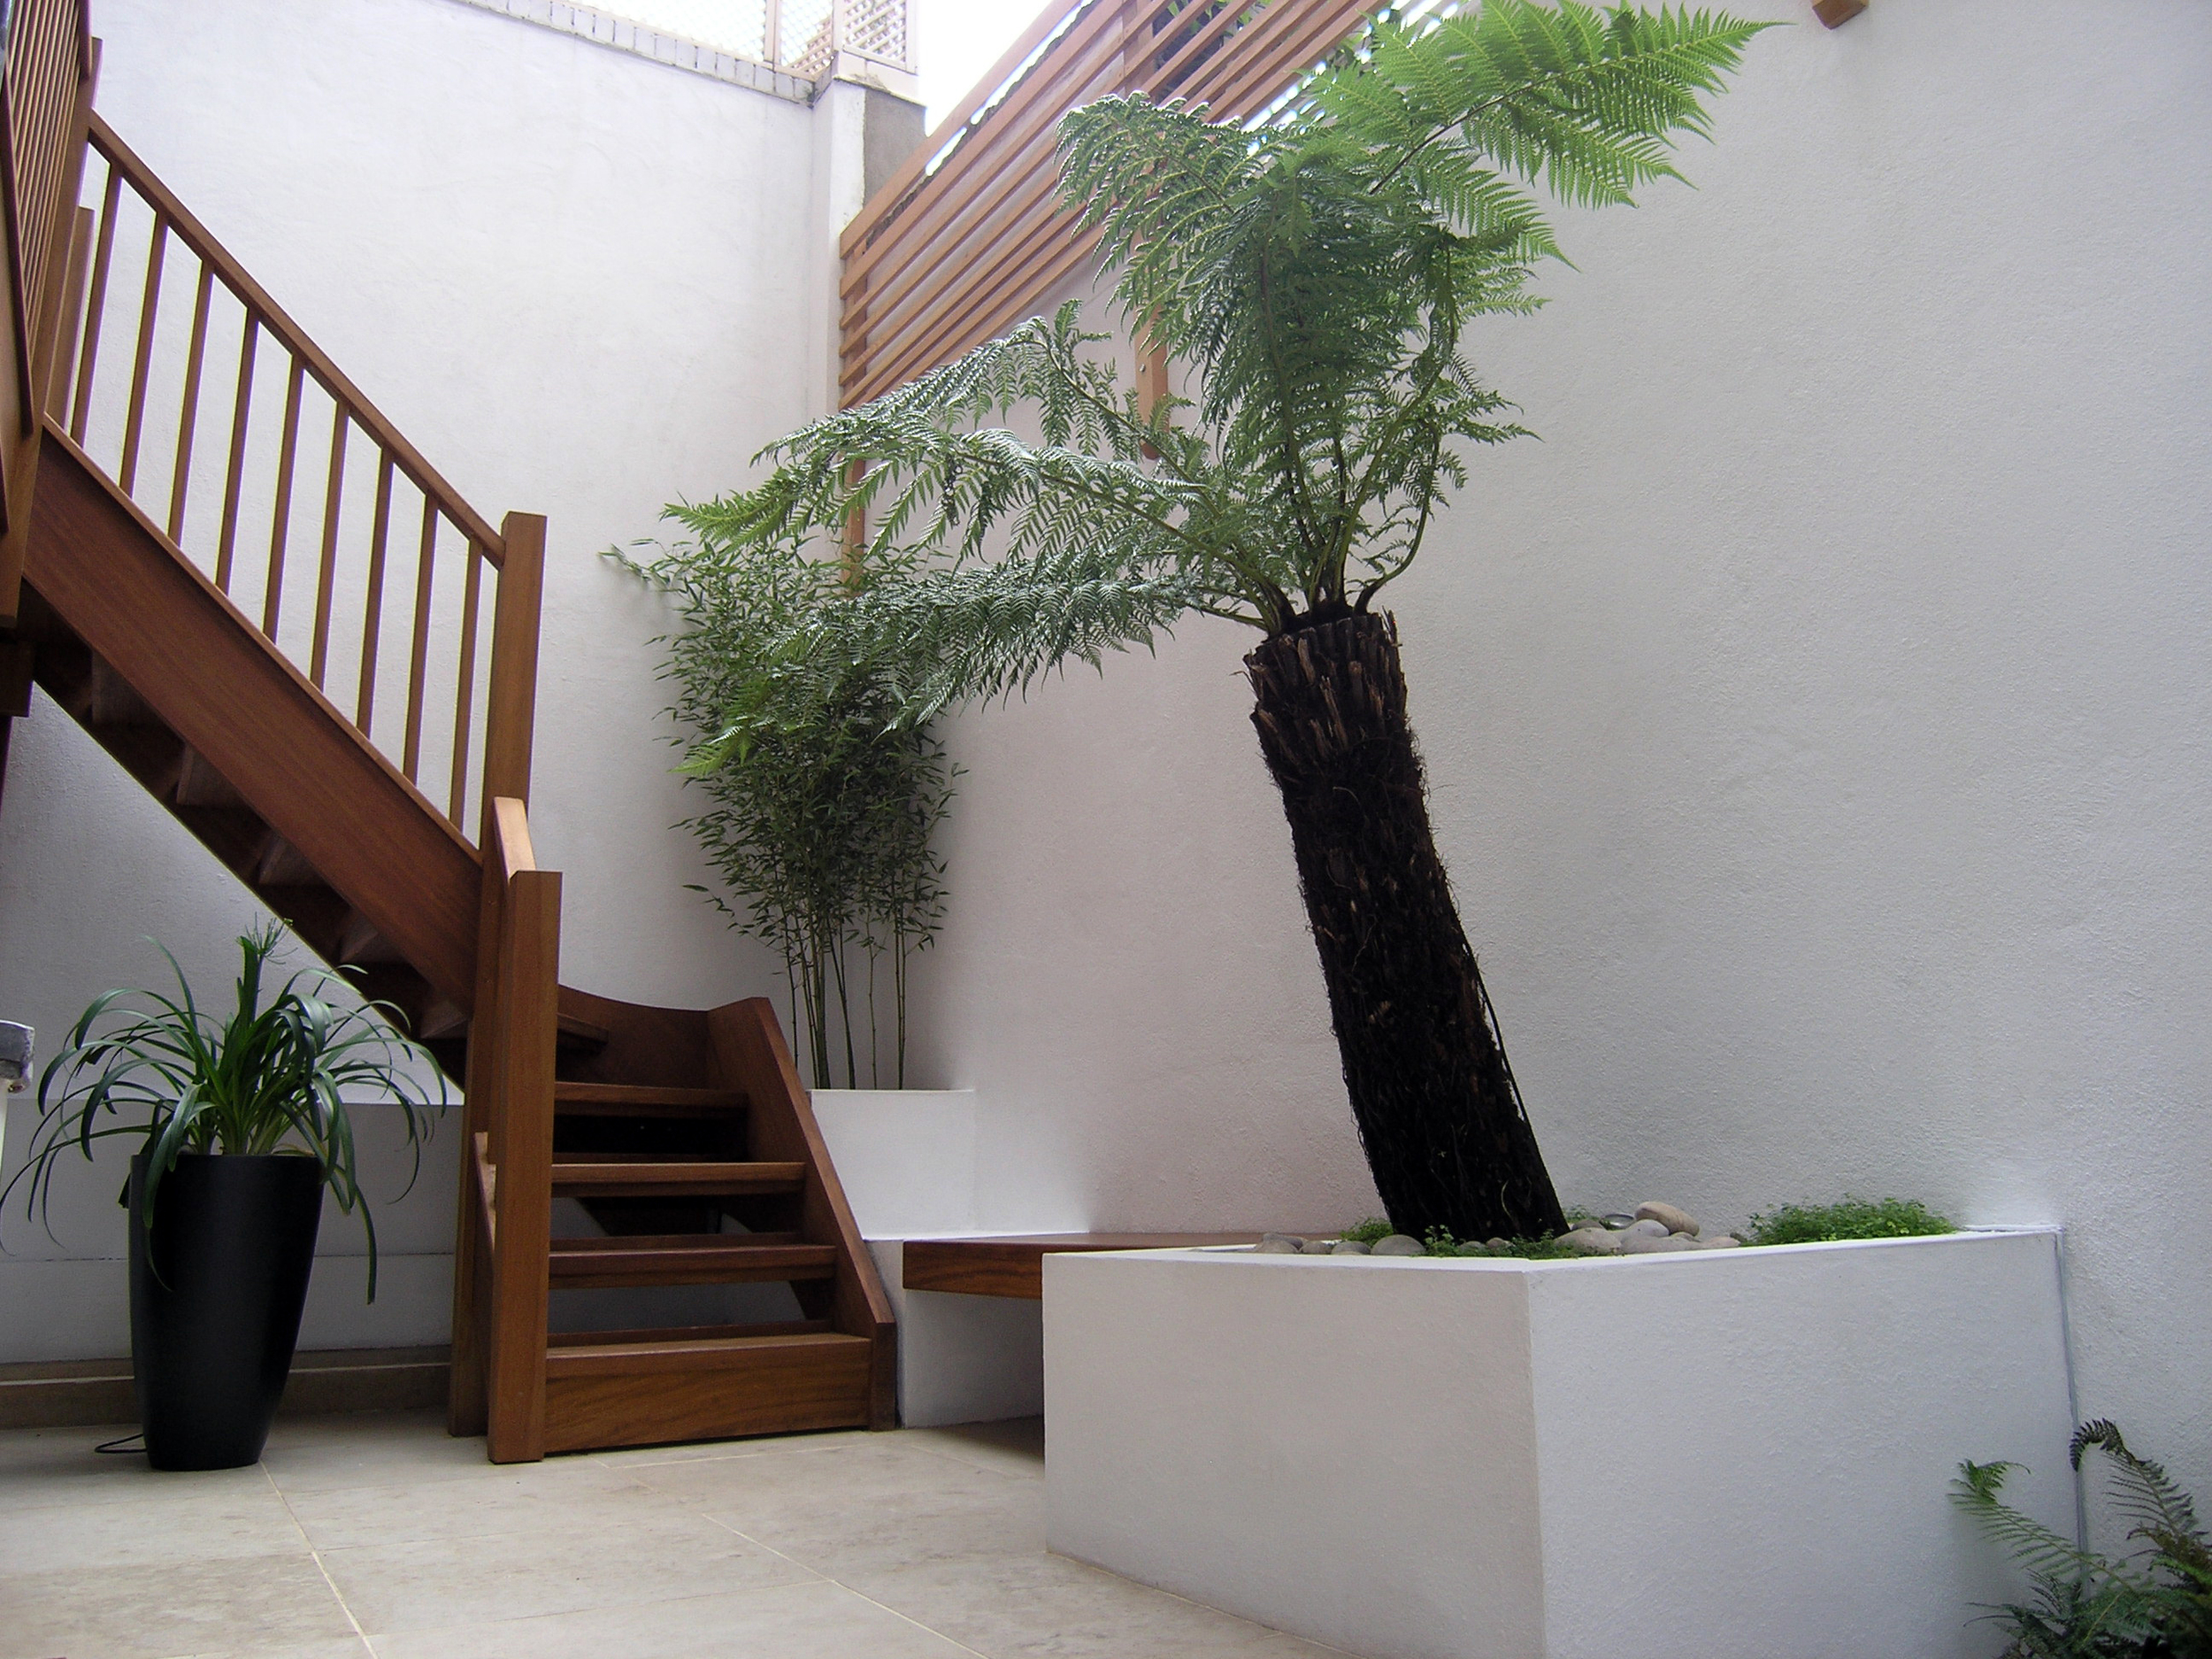 Small courtyard garden in N1 given makeover with iroko wood and plants